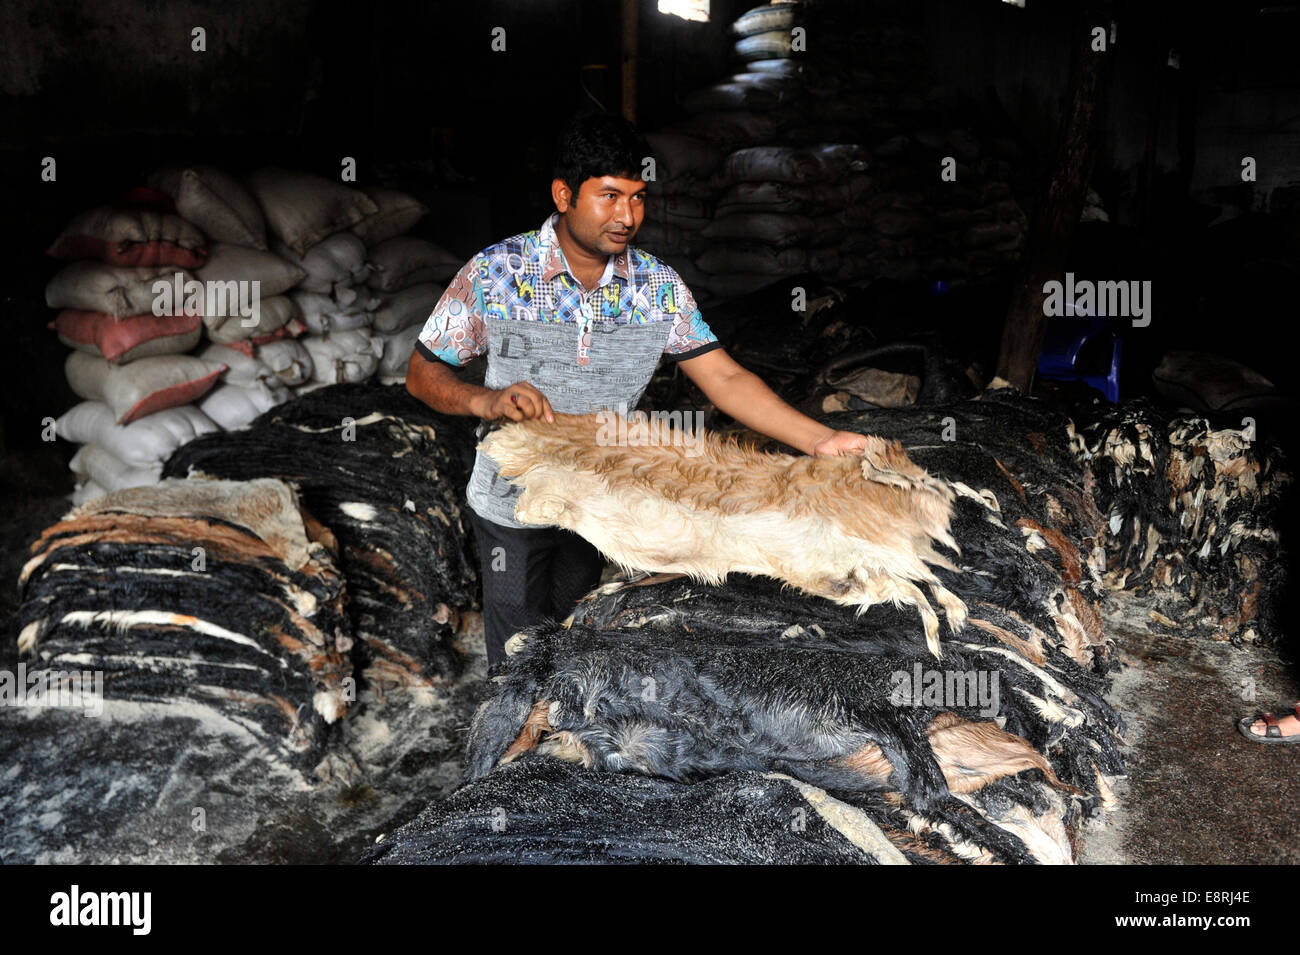 Workers are busy at Postha in old Dhaka arranging the leather. Bangladeshi  leather is from the sacrificed animals skin during the Eid al-Adha, and it  is the world's known best quality leather. ©